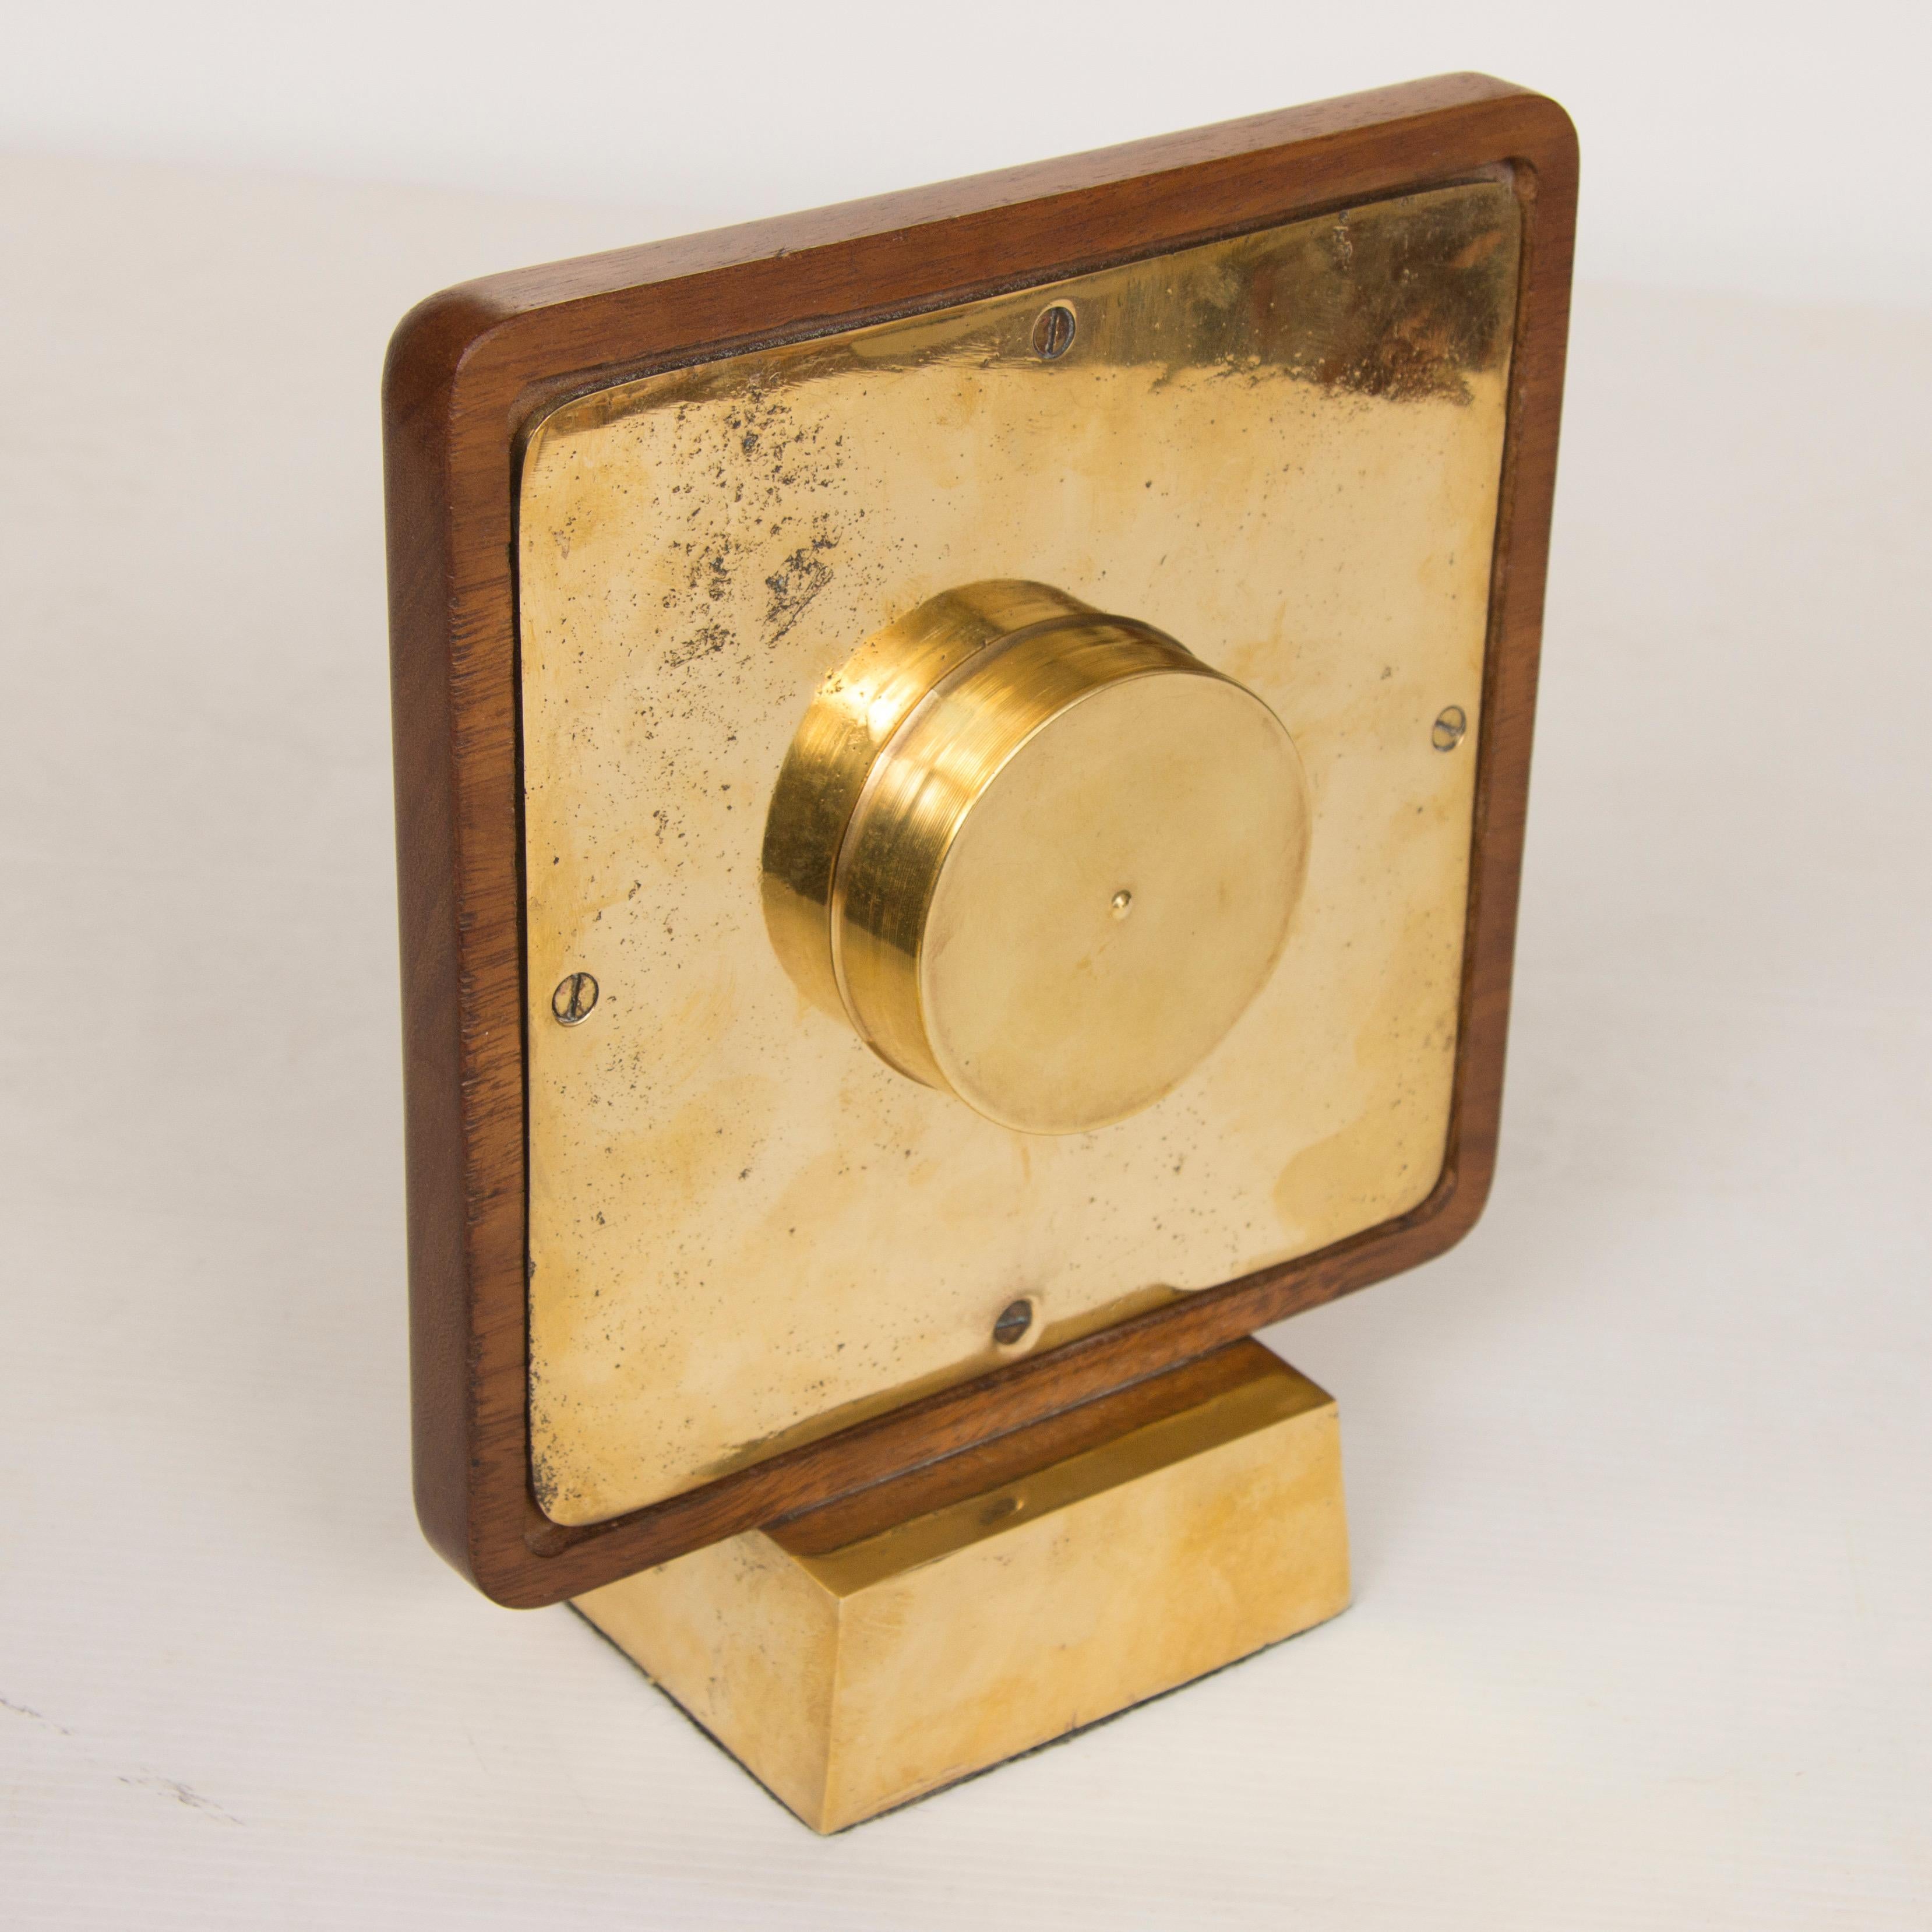 Midcentury clock.
Very impressive midcentury clock, heavy gilt bronze base supporting a Swiss made gilt bronze clock face in a beautiful solid teak frame.
The clock movement has been replaced with a battery operated movement, so it keeps perfect